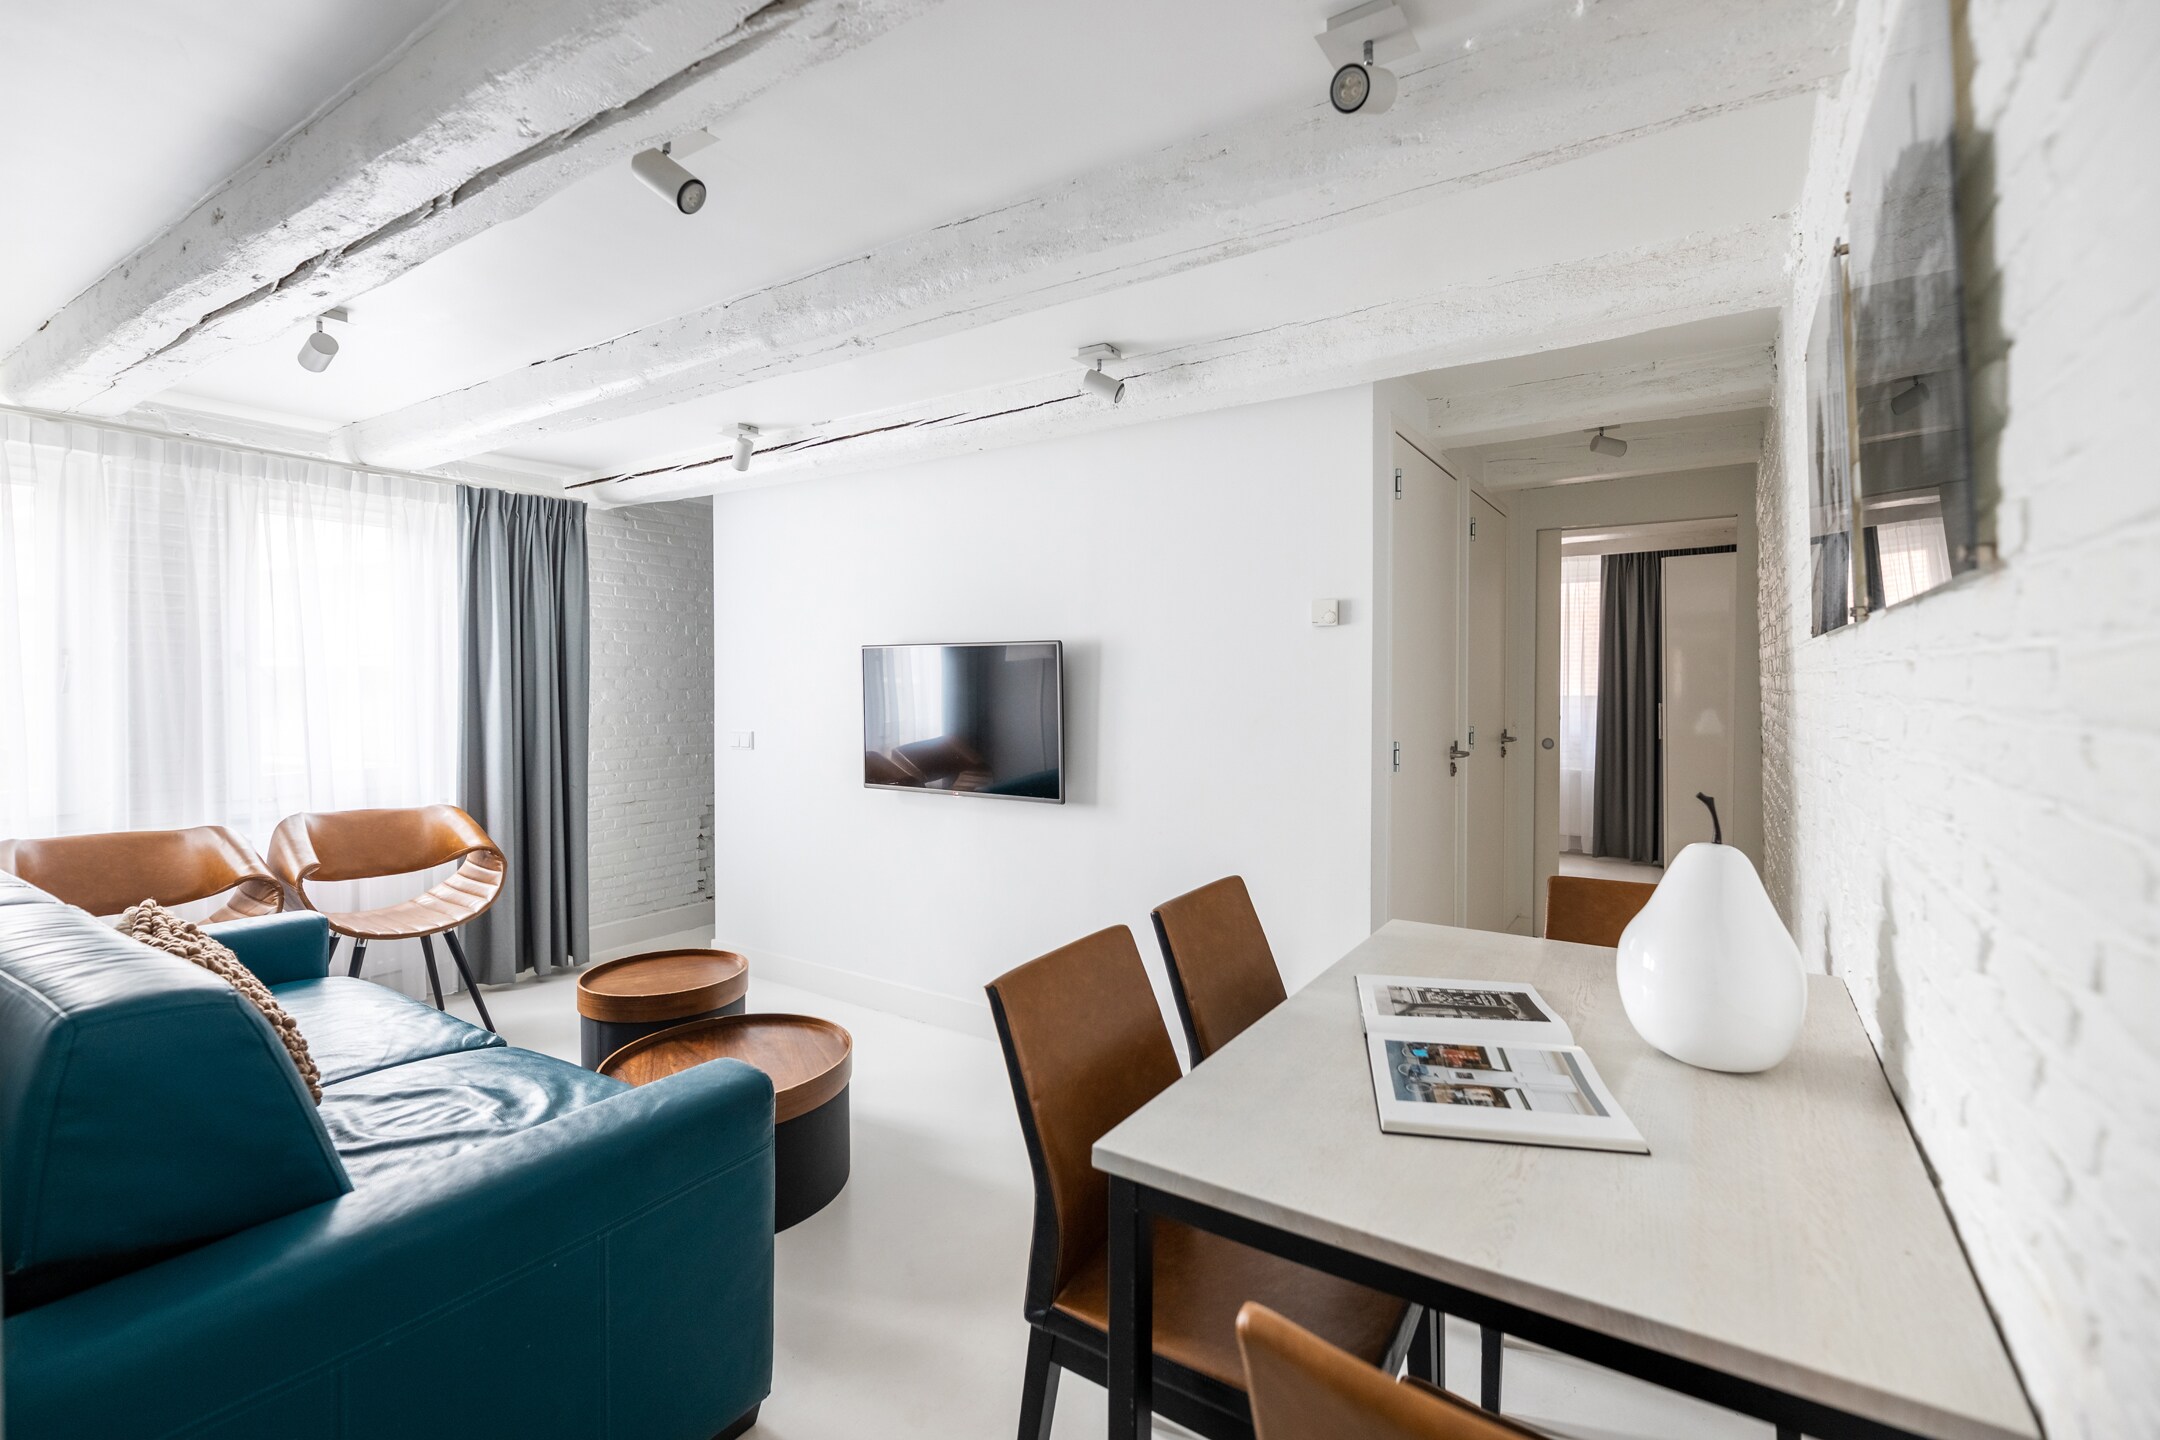 Property Image 1 - Glamorous family apartment by the Amsterdam canals